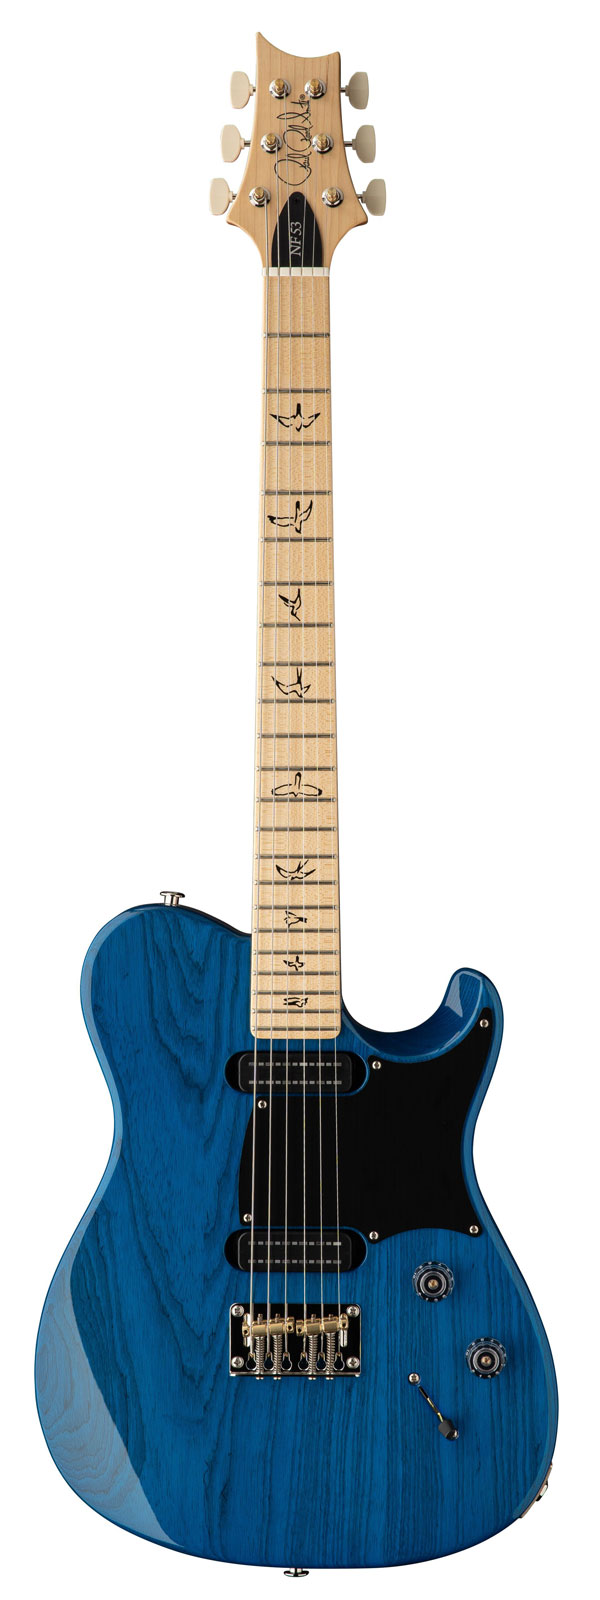 PRS - PAUL REED SMITH NF53 BLUE MATTEO